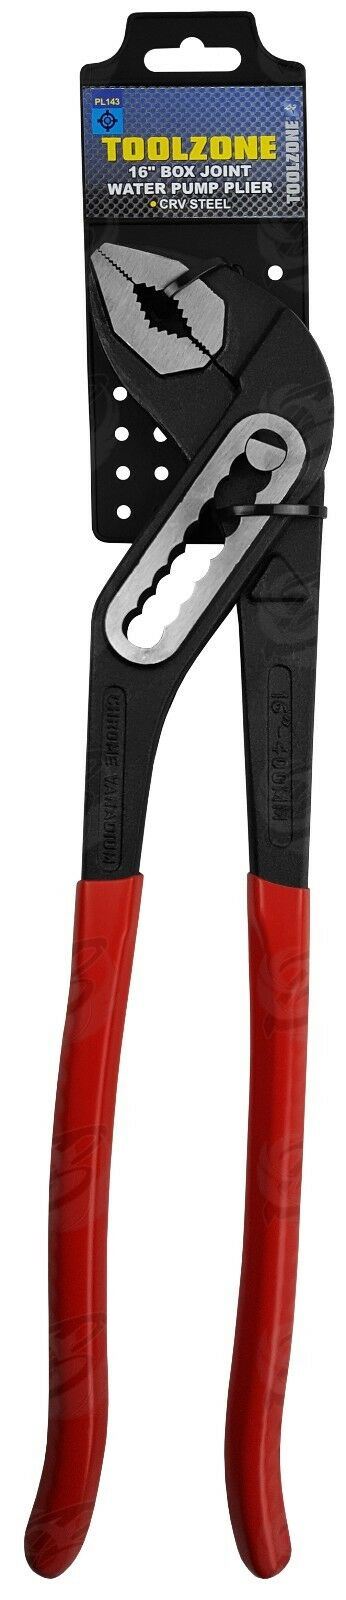 TOOLZONE 16" BOX JOINT WATER PUMP PLIERS